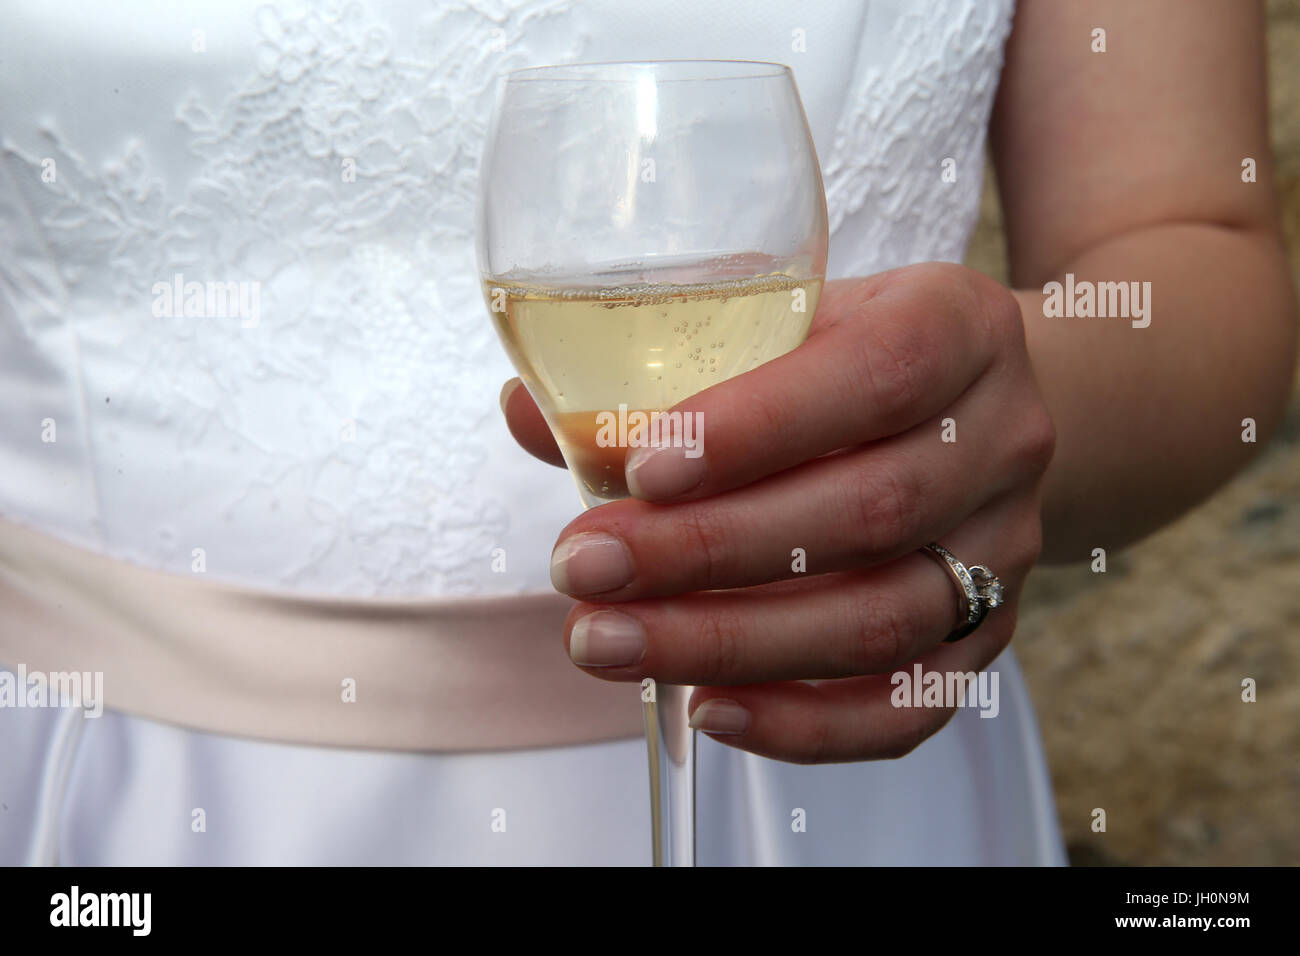 Bride holding a glass of champagne. France. Stock Photo